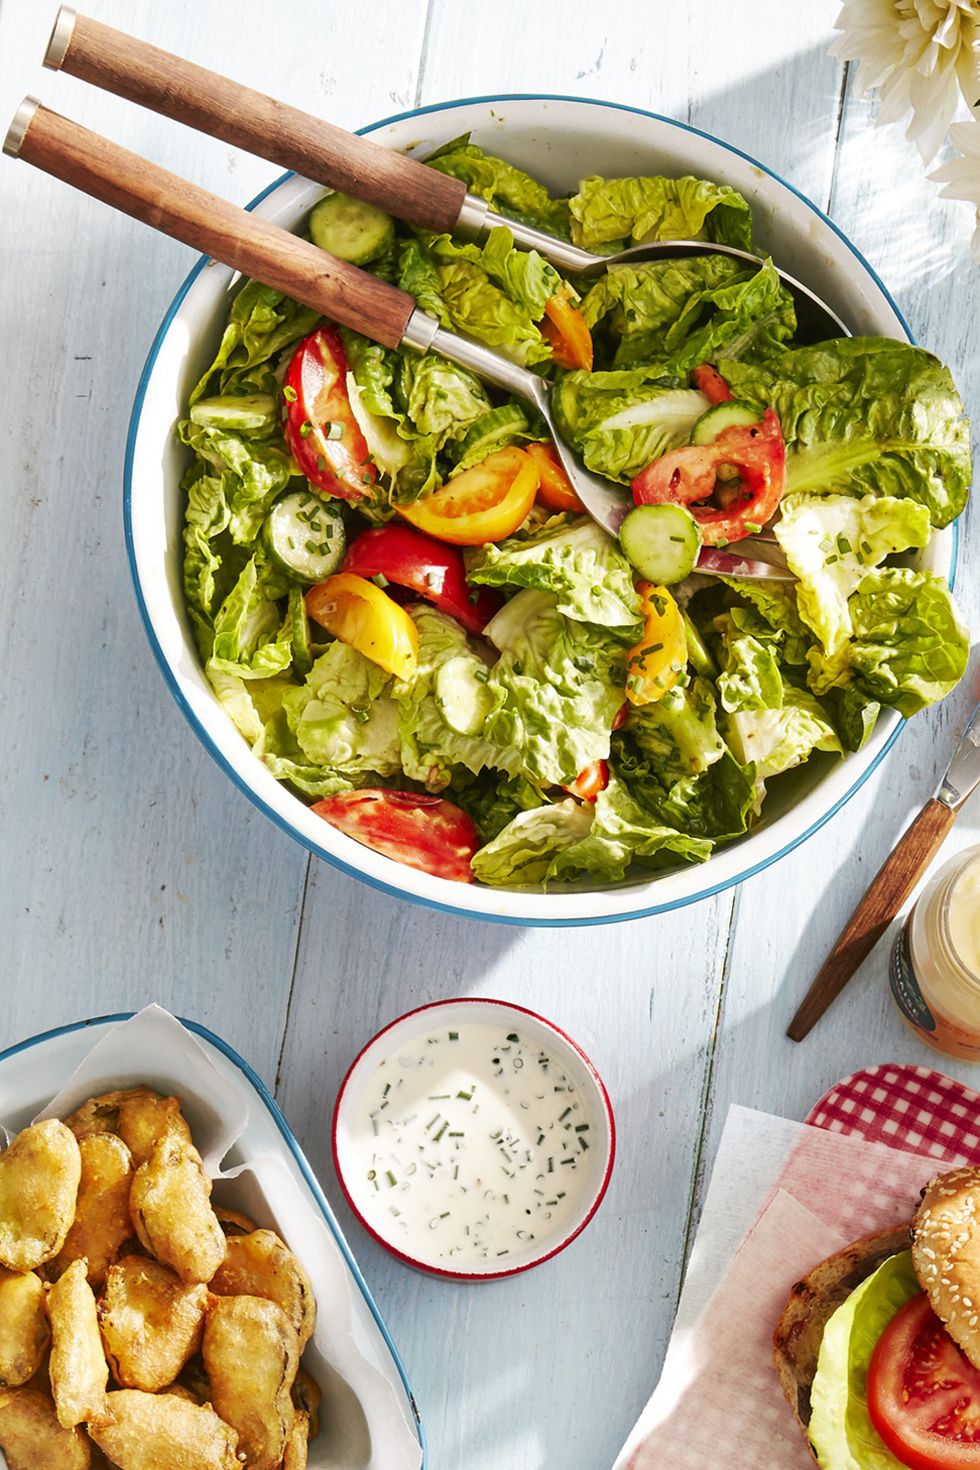 bbq party tossed salad with green goddess dressing